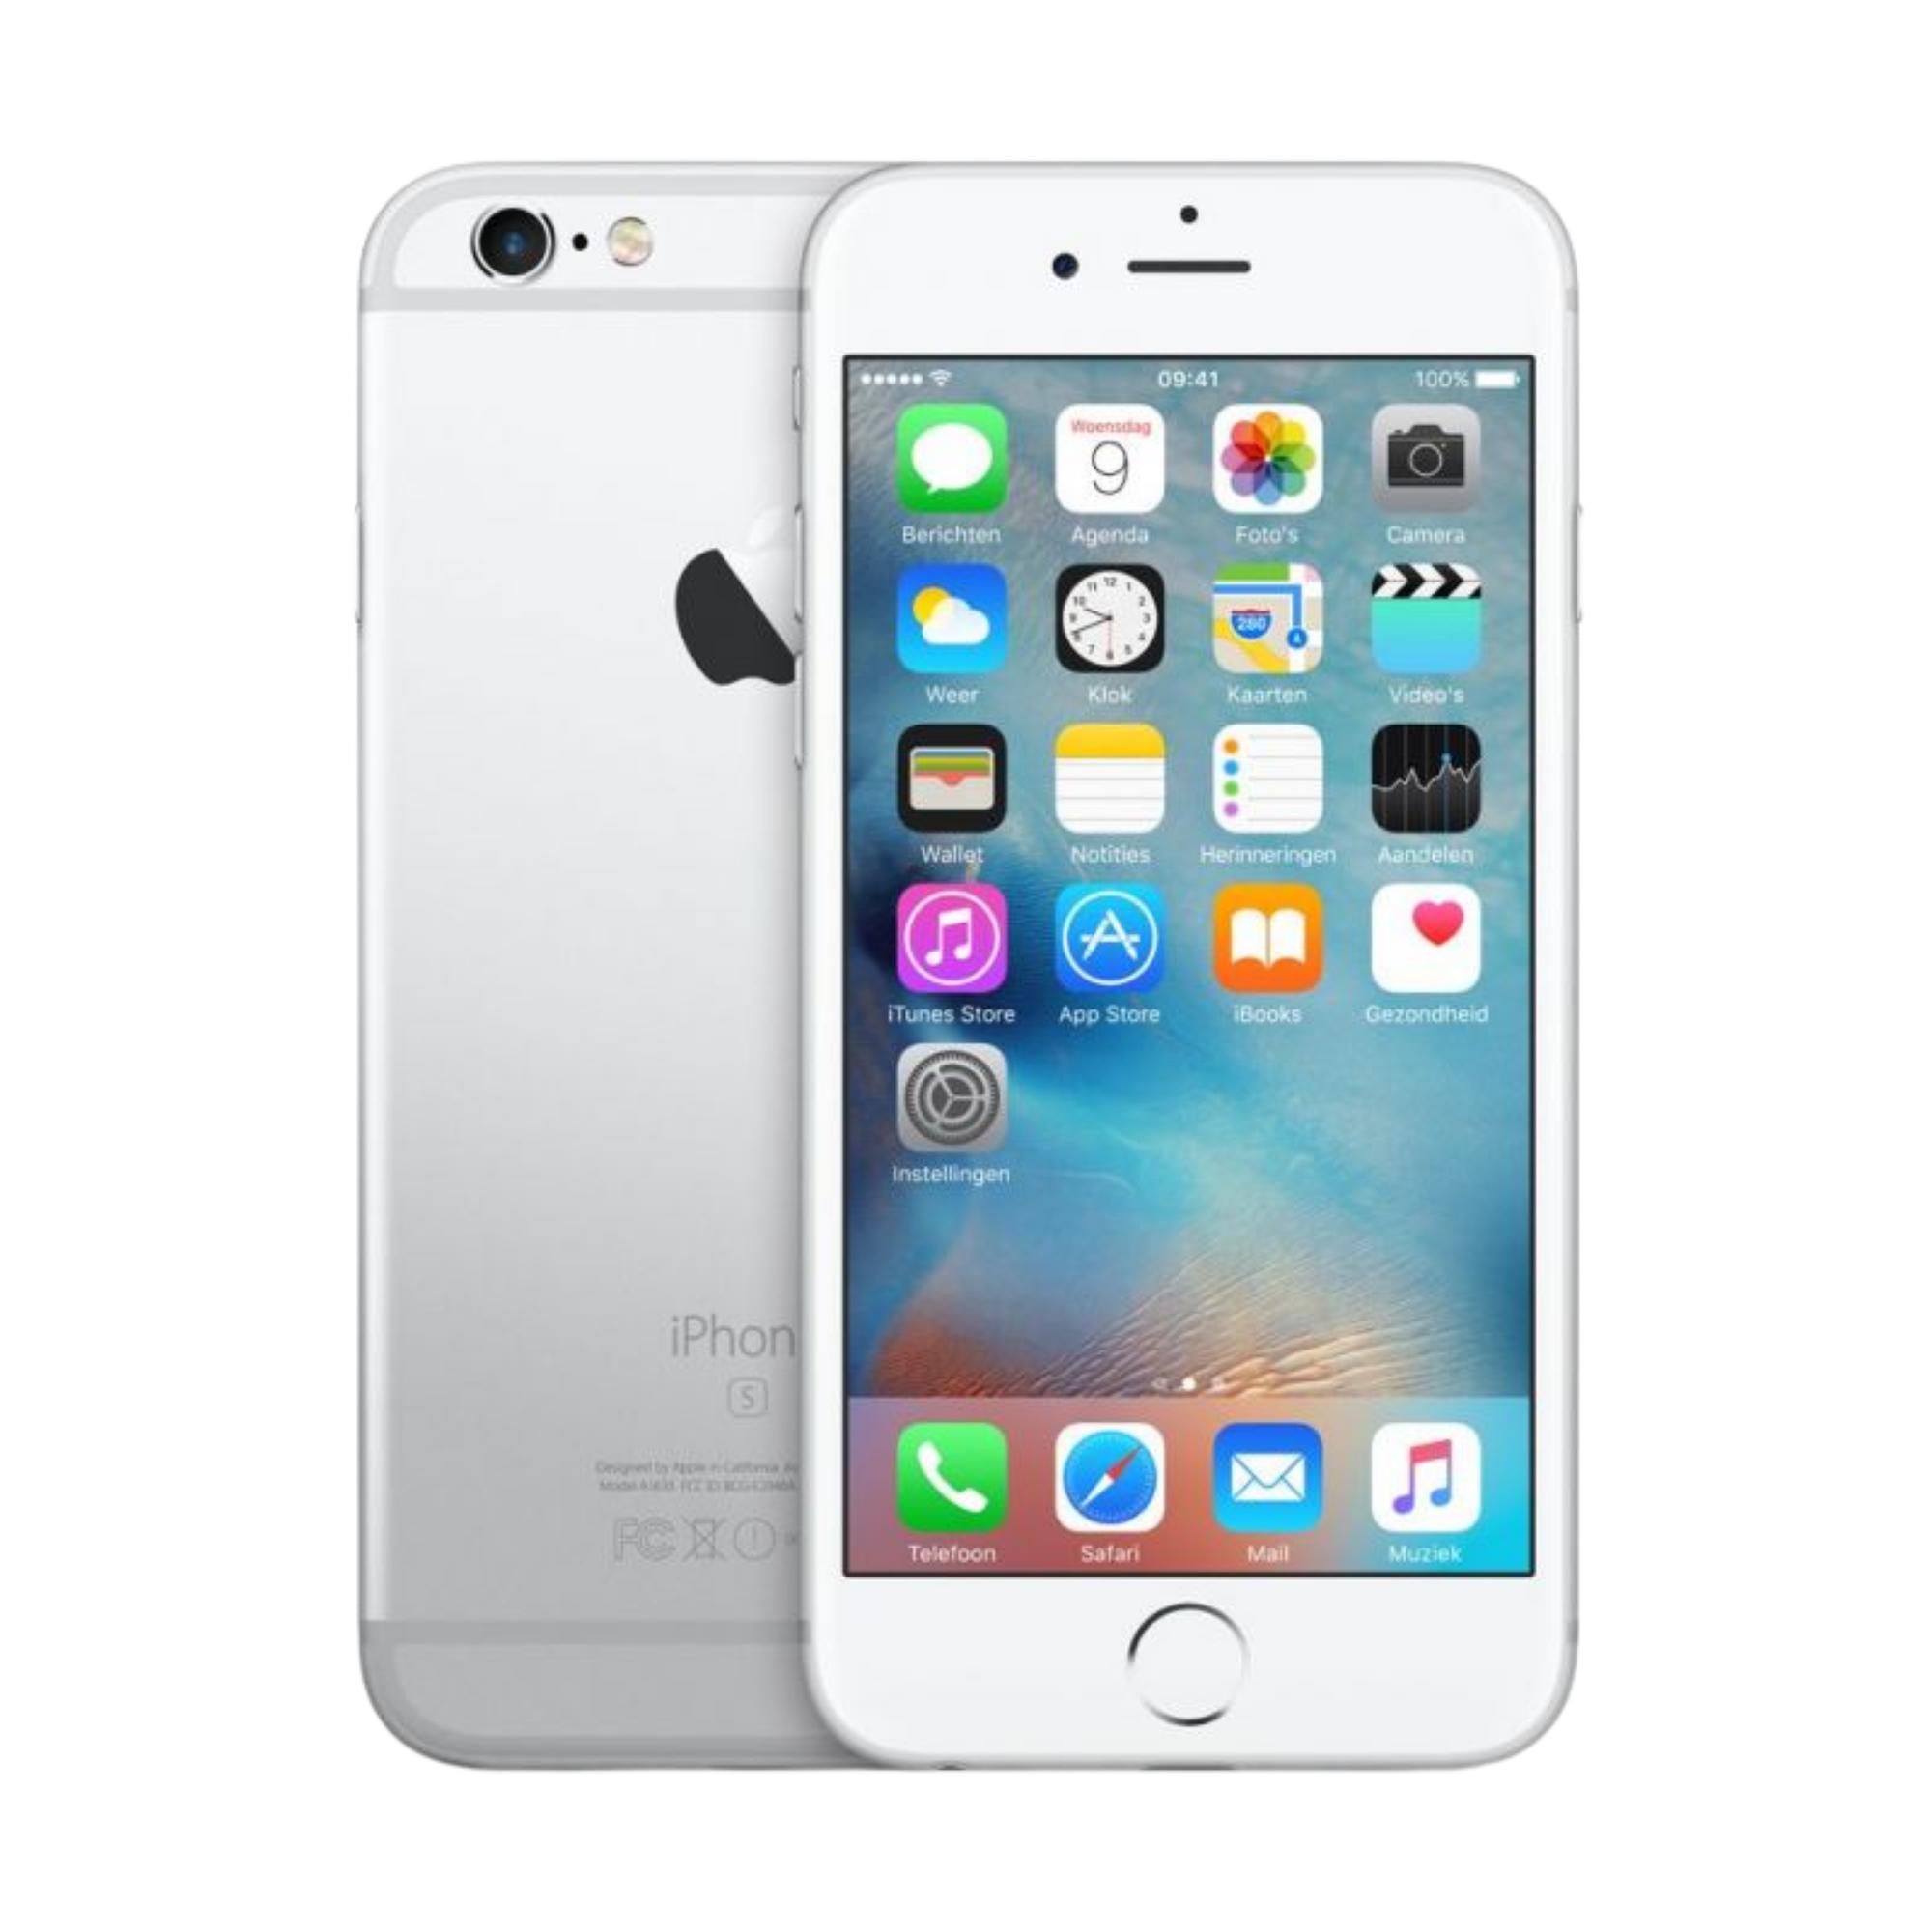 IPHONE 6 / 64GB  / 4.7″ / 8MPX / BIANCO / ACCETABILE / NO TOUCH ID